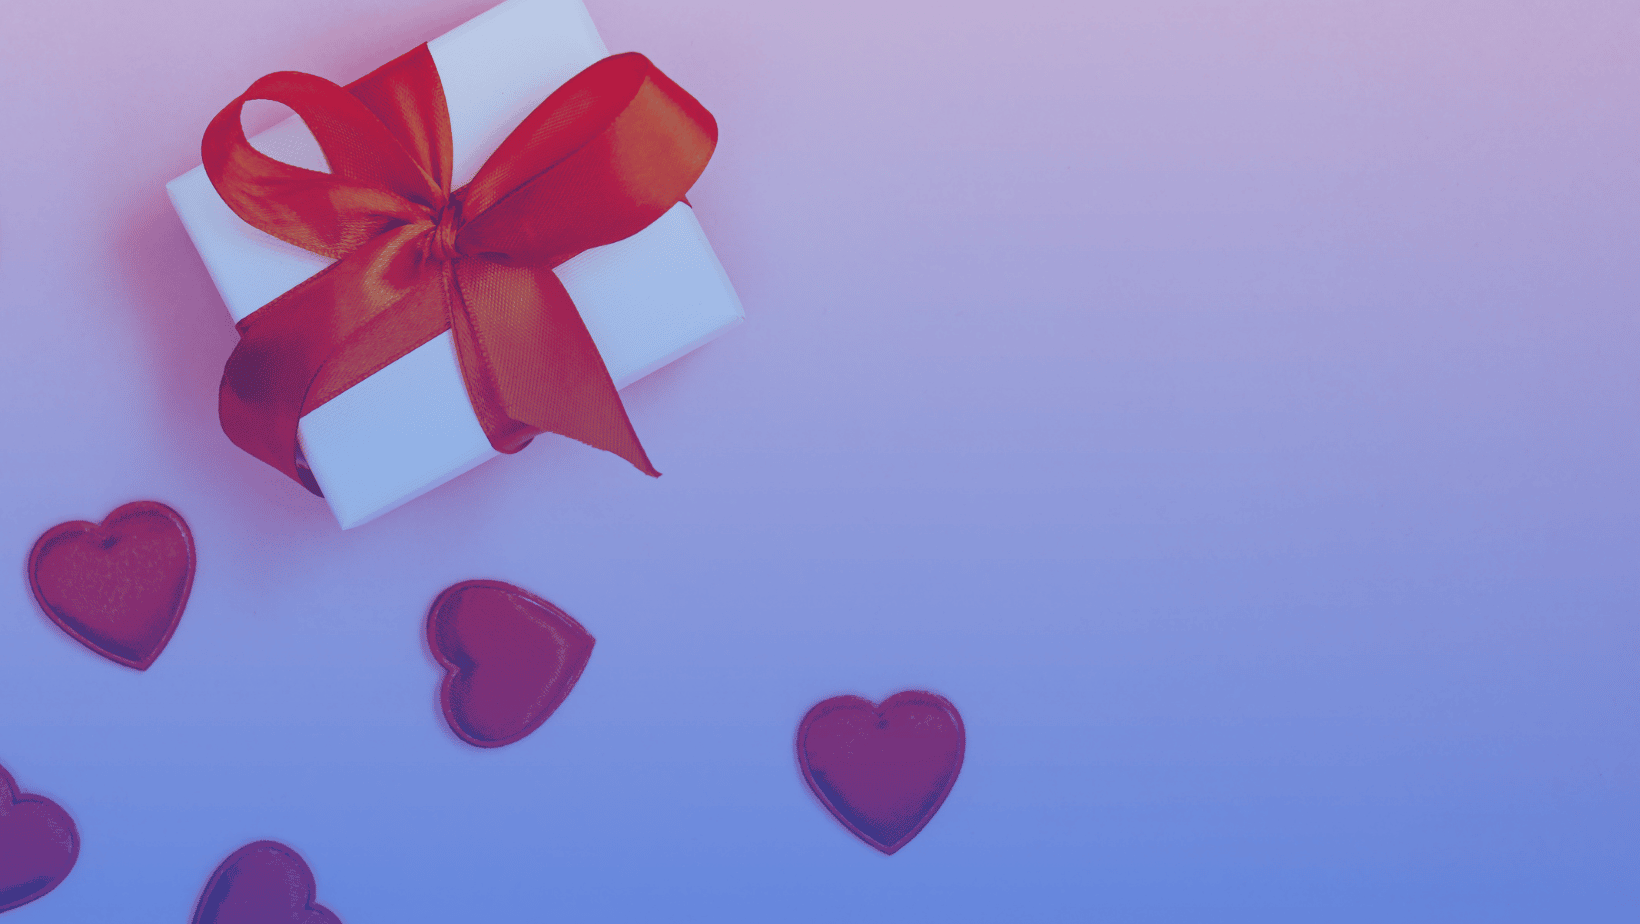 Fraud is in the Air: Why Fraudsters Love Valentine’s Day